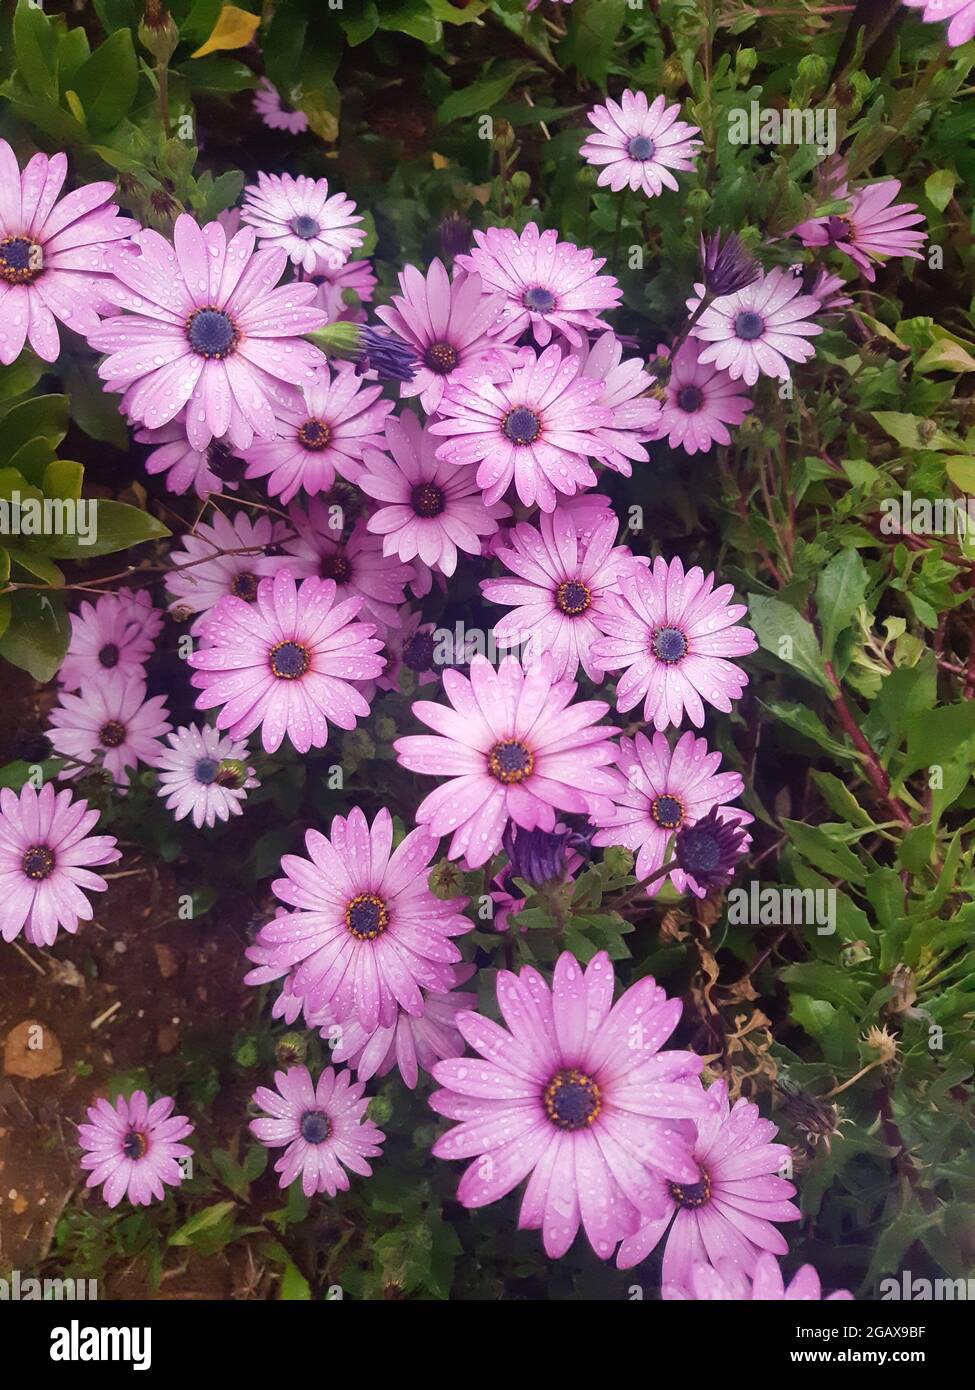 pink flowers growing in the garden, Multicolored Flower Background. Stock Photo